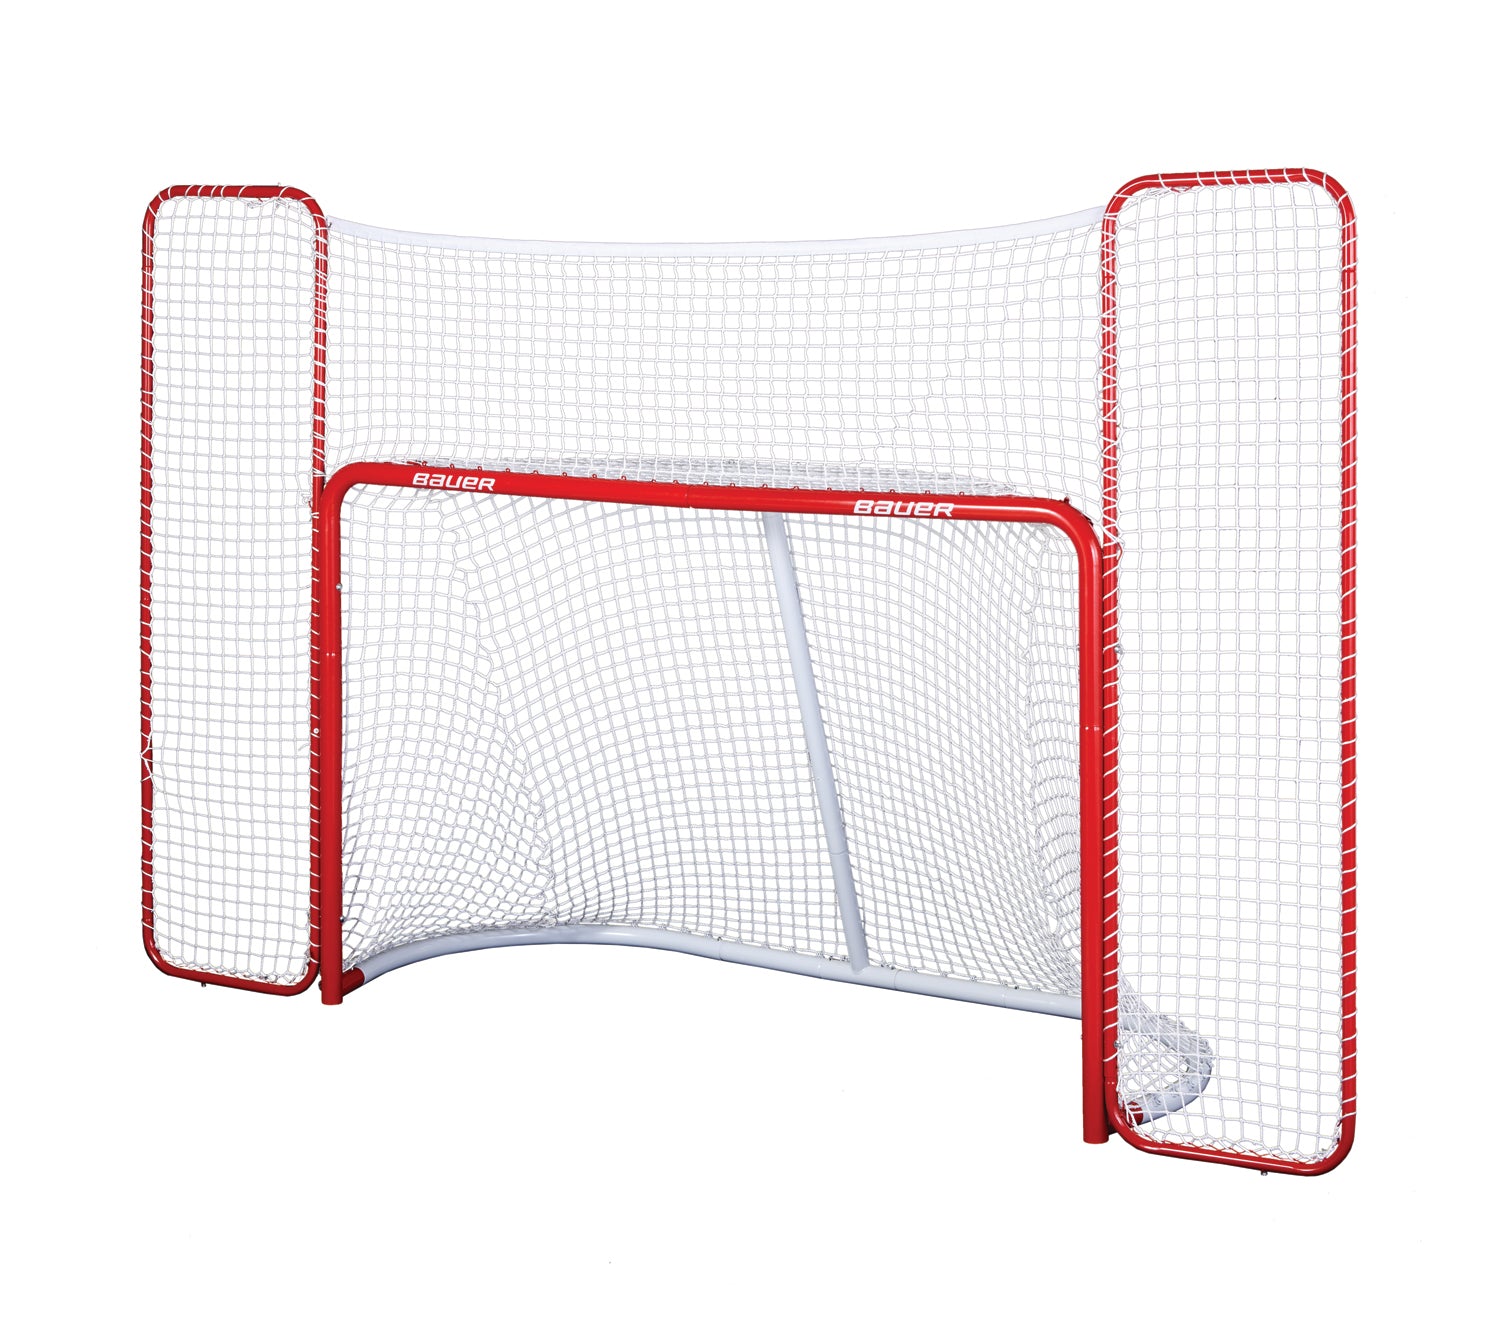 OFFICIAL PERFORMANCE STEEL GOAL WITH BACKSTOP